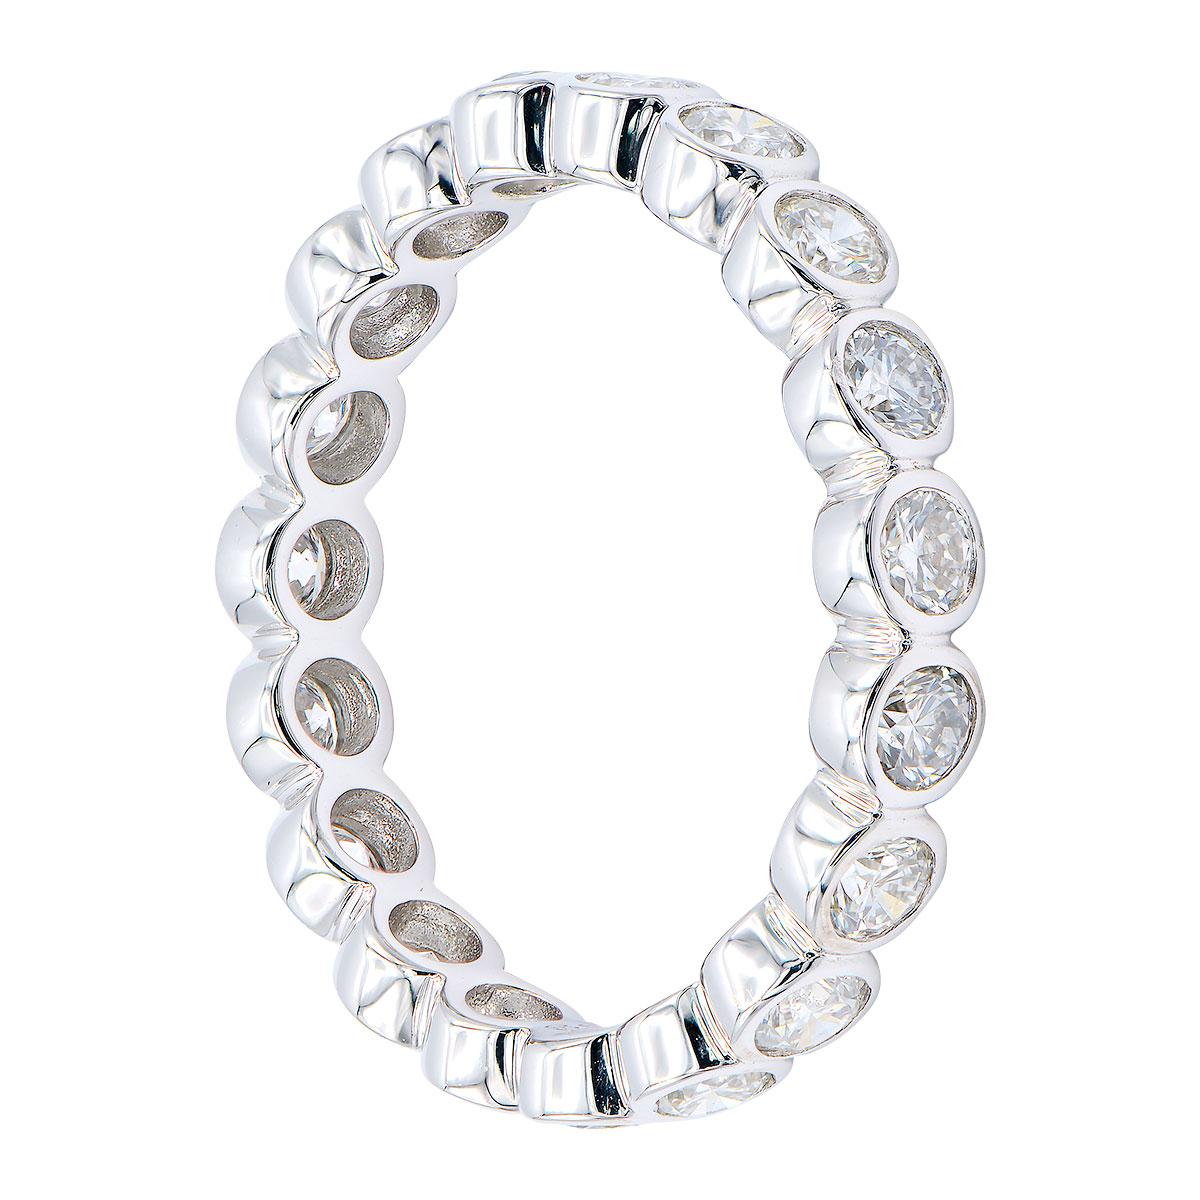 This beautiful eternity band has diamonds going all the way around which are bezel set in 2.6 grams of 18 karat white gold. There are 17 round VS2, G color diamonds totaling 1.12 carats. The round shape made by the setting around each diamond makes